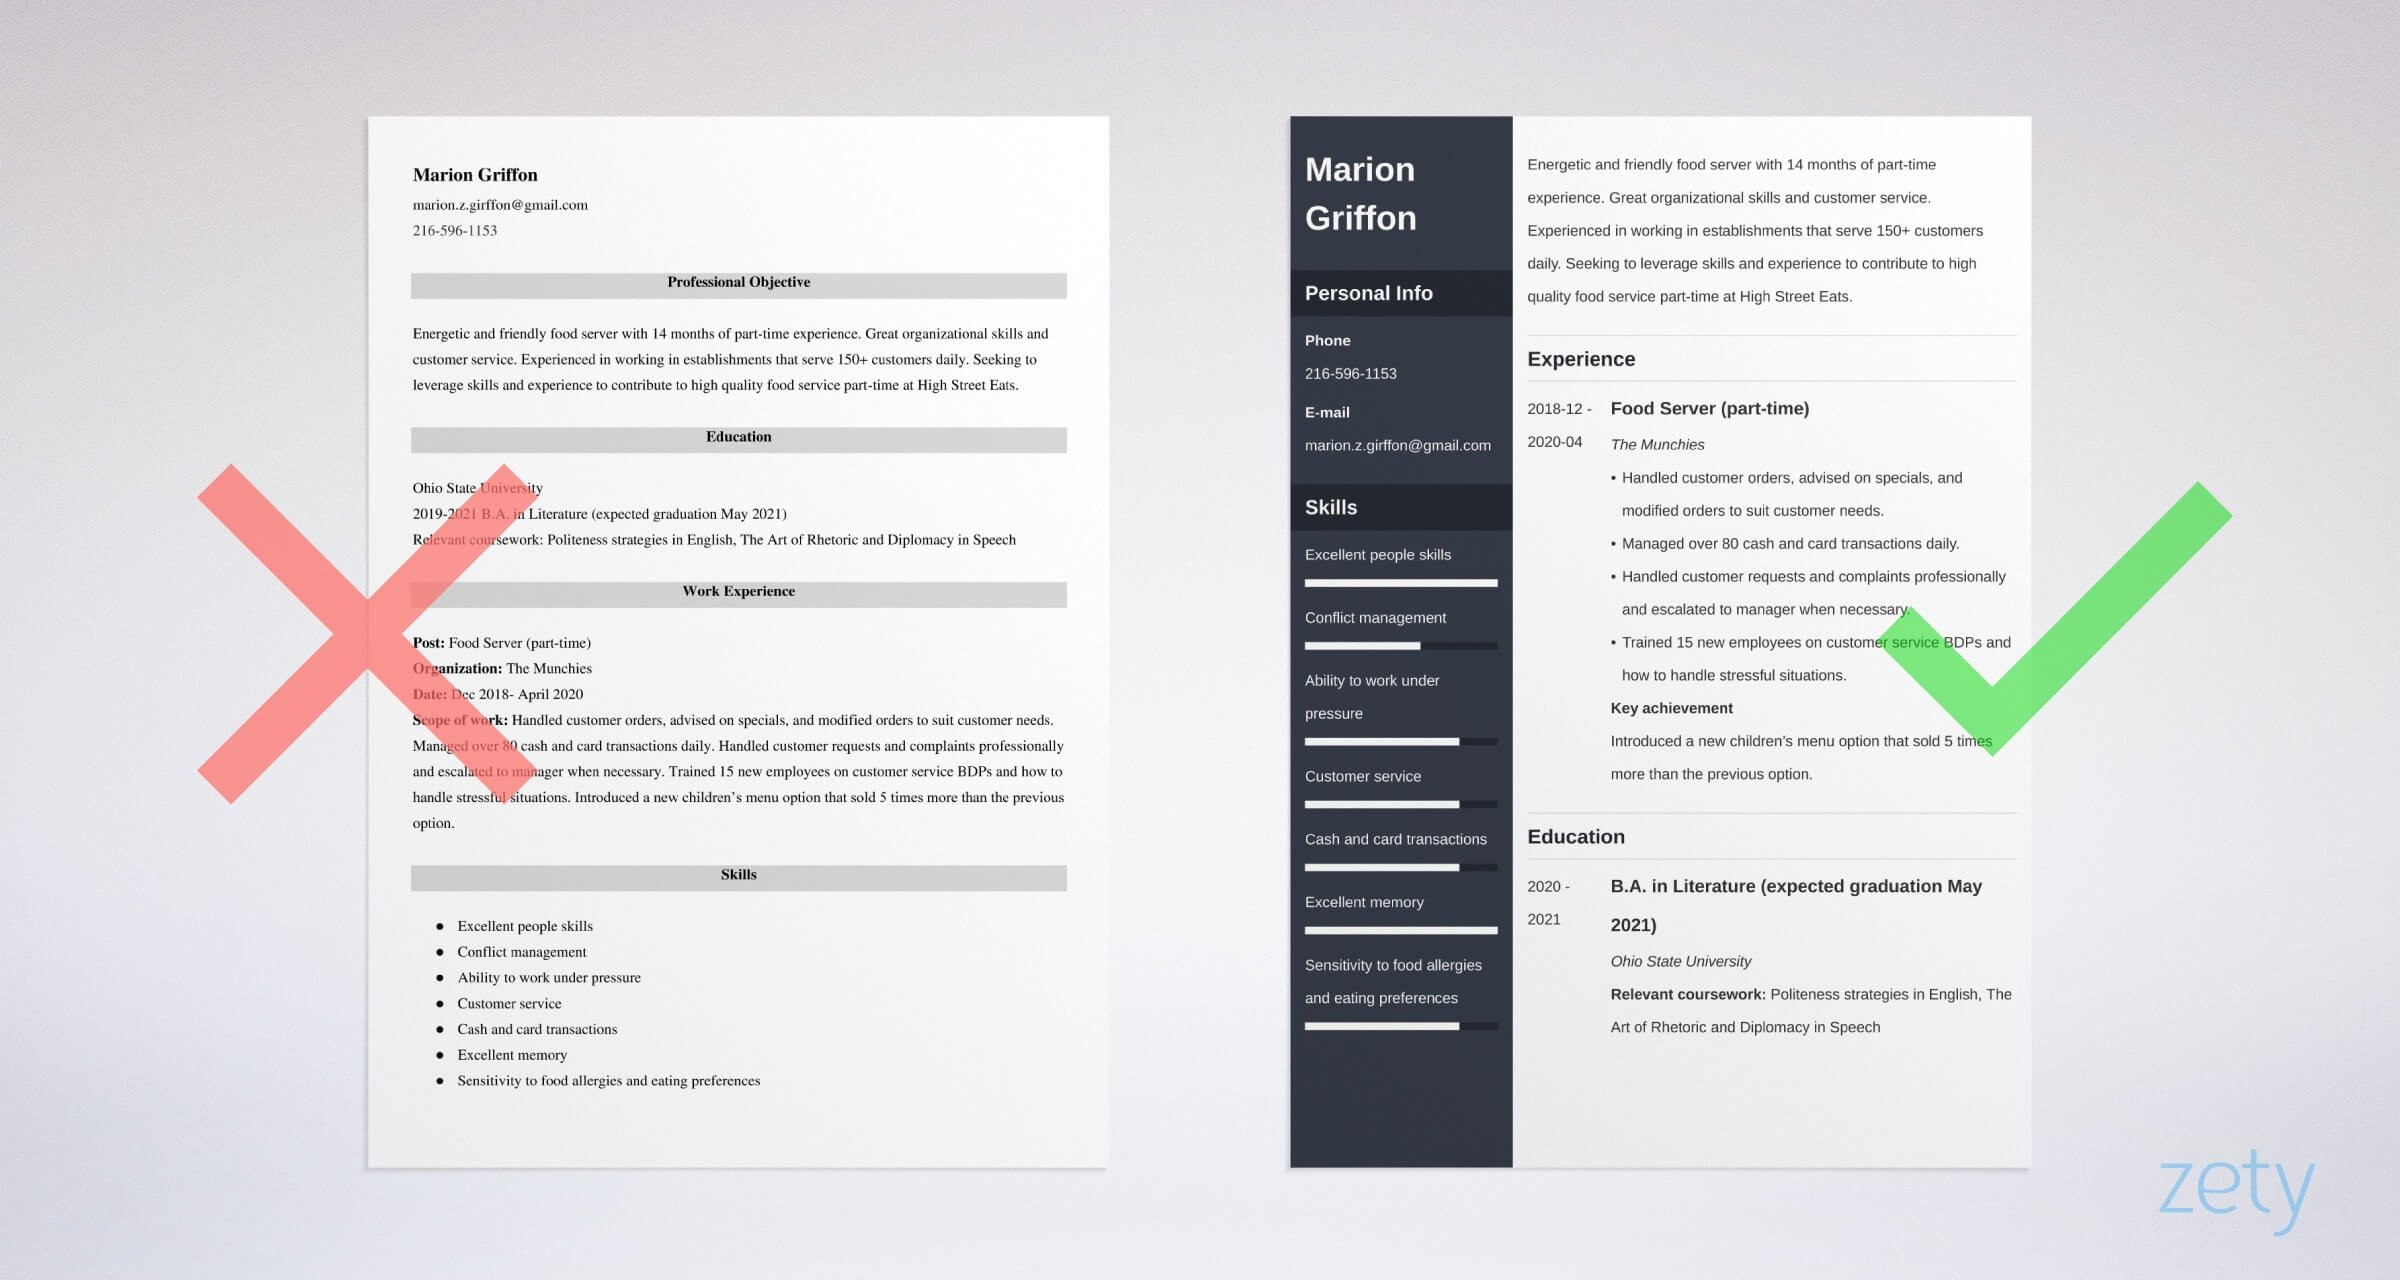 Part Time Customer Service Resume Sample Resume for A Part-time Job: Template and How to Write